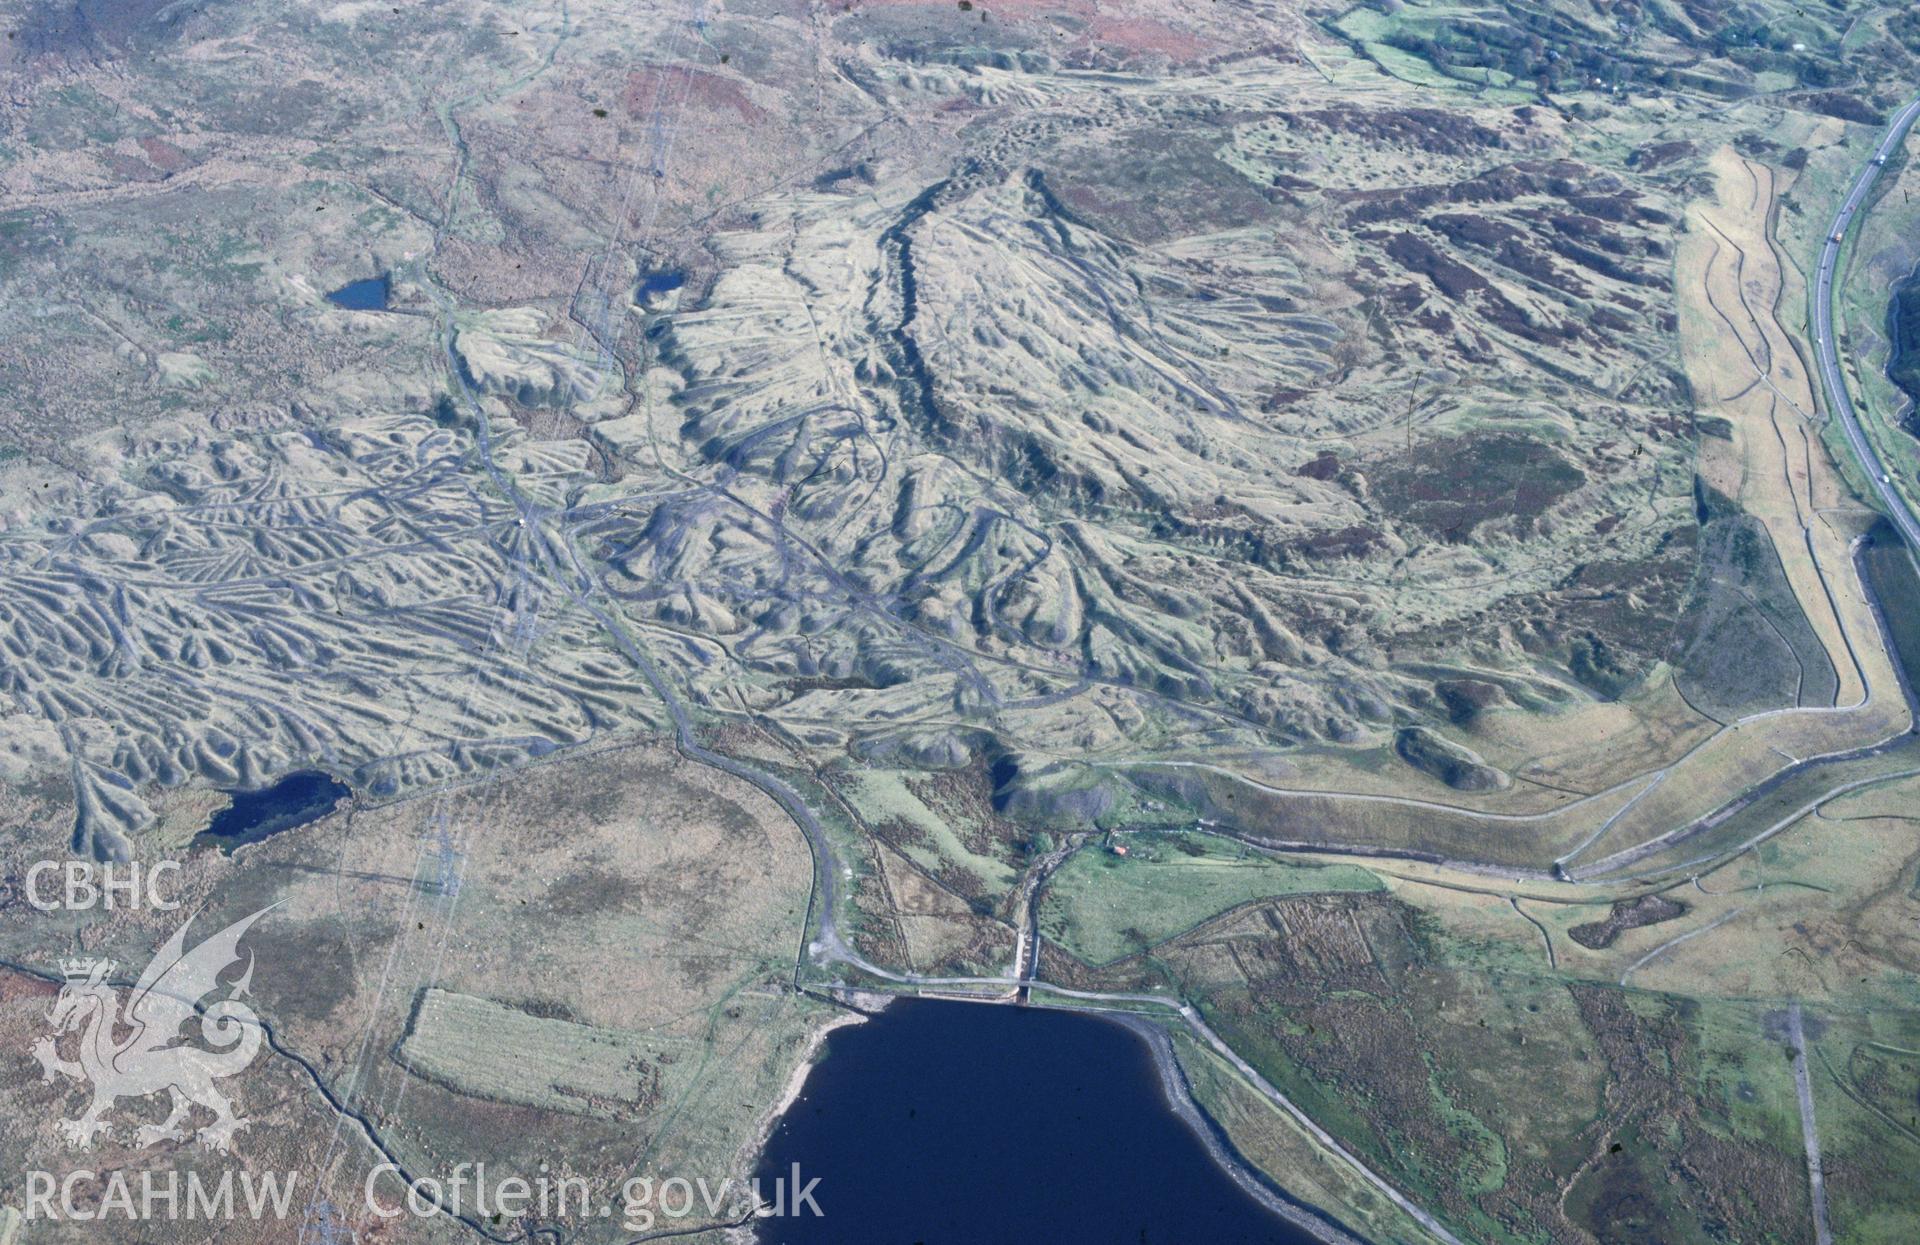 Slide of RCAHMW colour oblique aerial photograph of Clydach Terrace Mine Workings, taken by C.R. Musson, 19/10/1992.